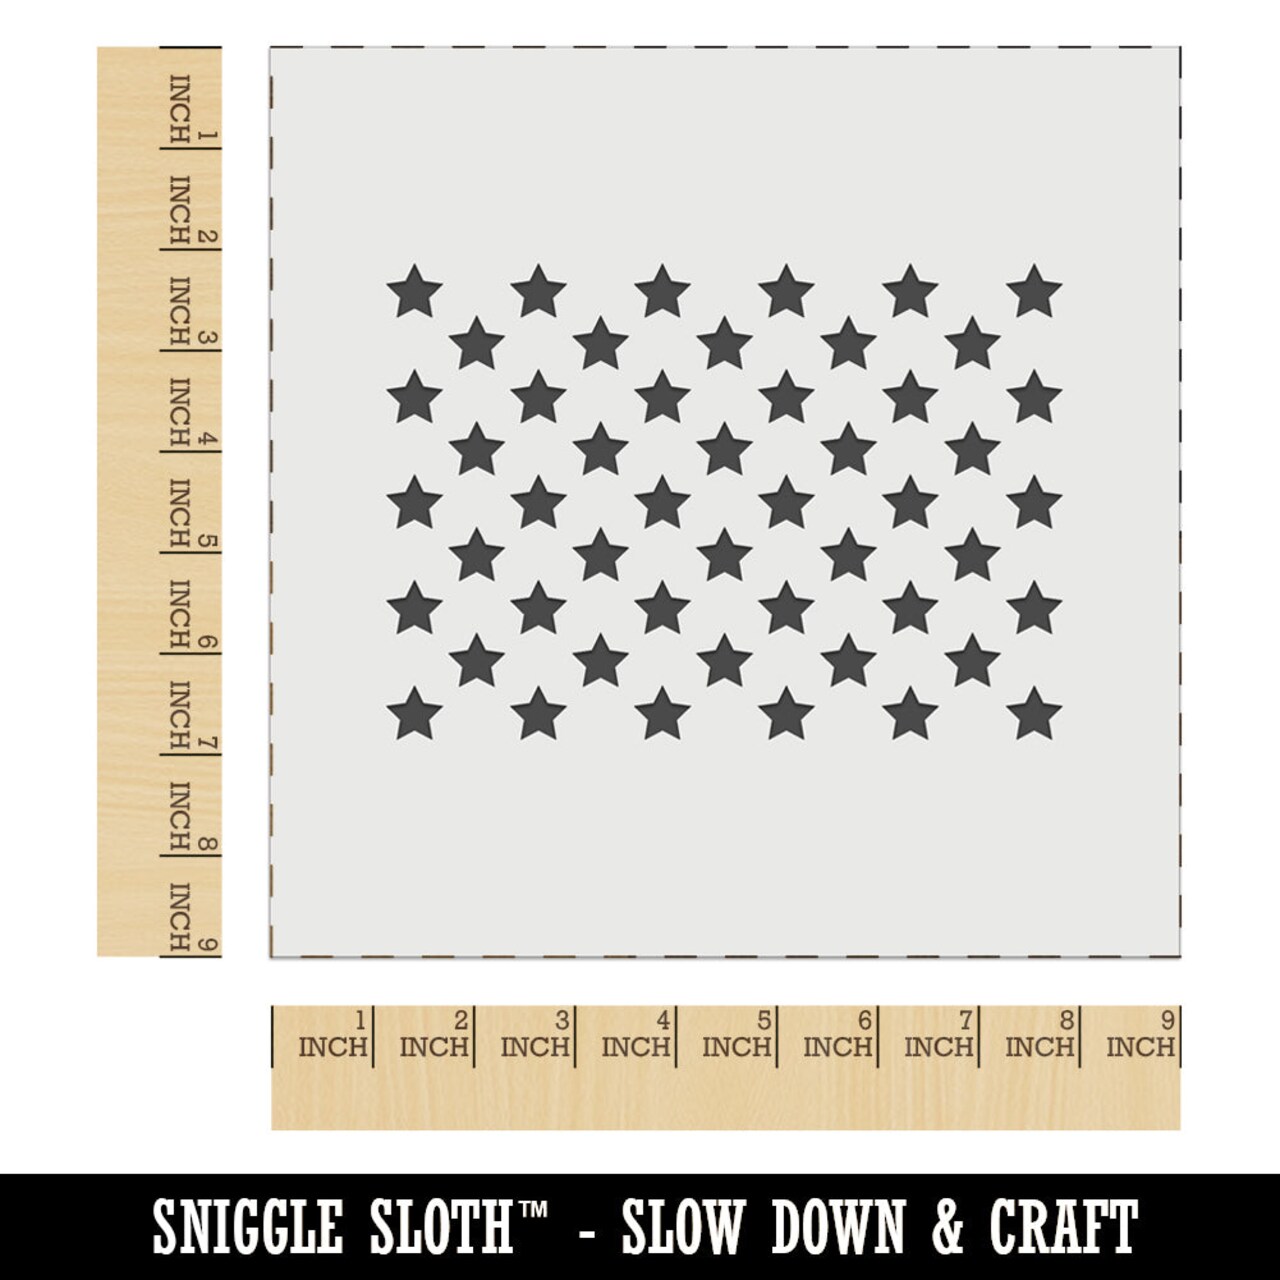 50 Stars to the American Flag USA United States Wall Cookie DIY Craft  Reusable Stencil